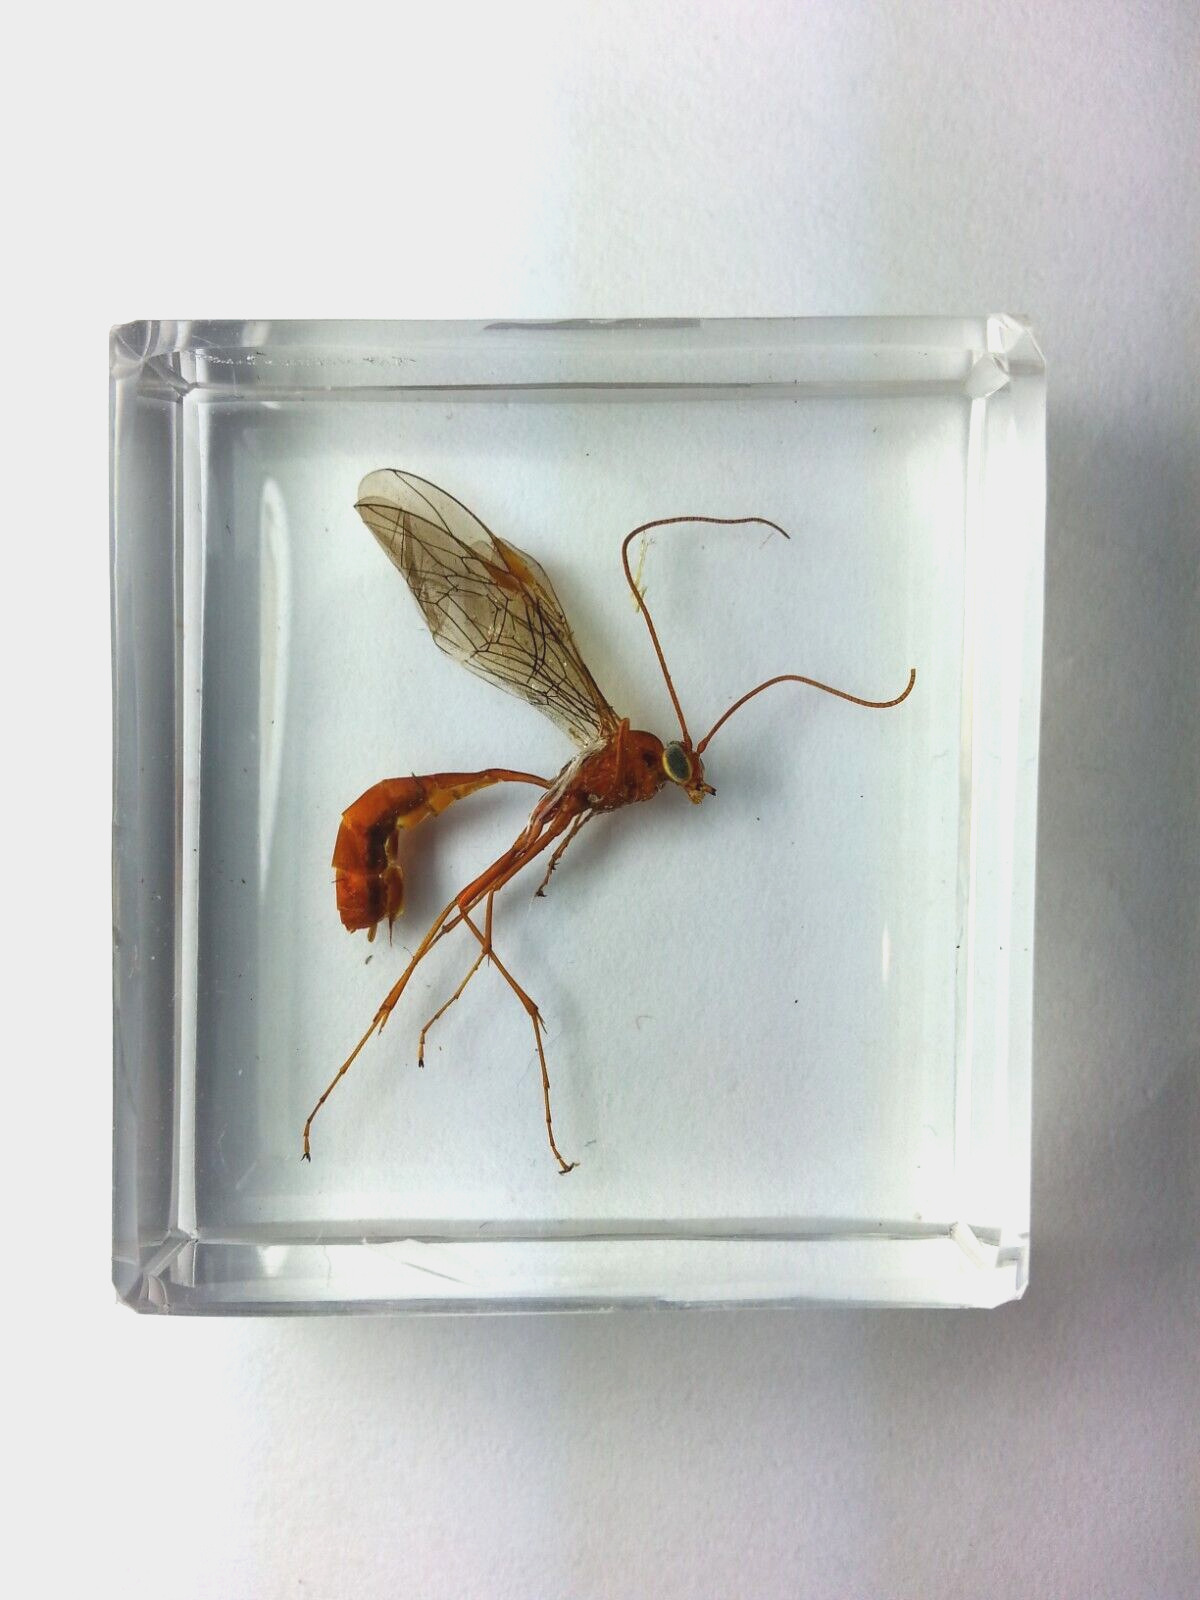 Real wasp resin casting : ICHNEUMON PARASITIC WASP . Perfect for study material.